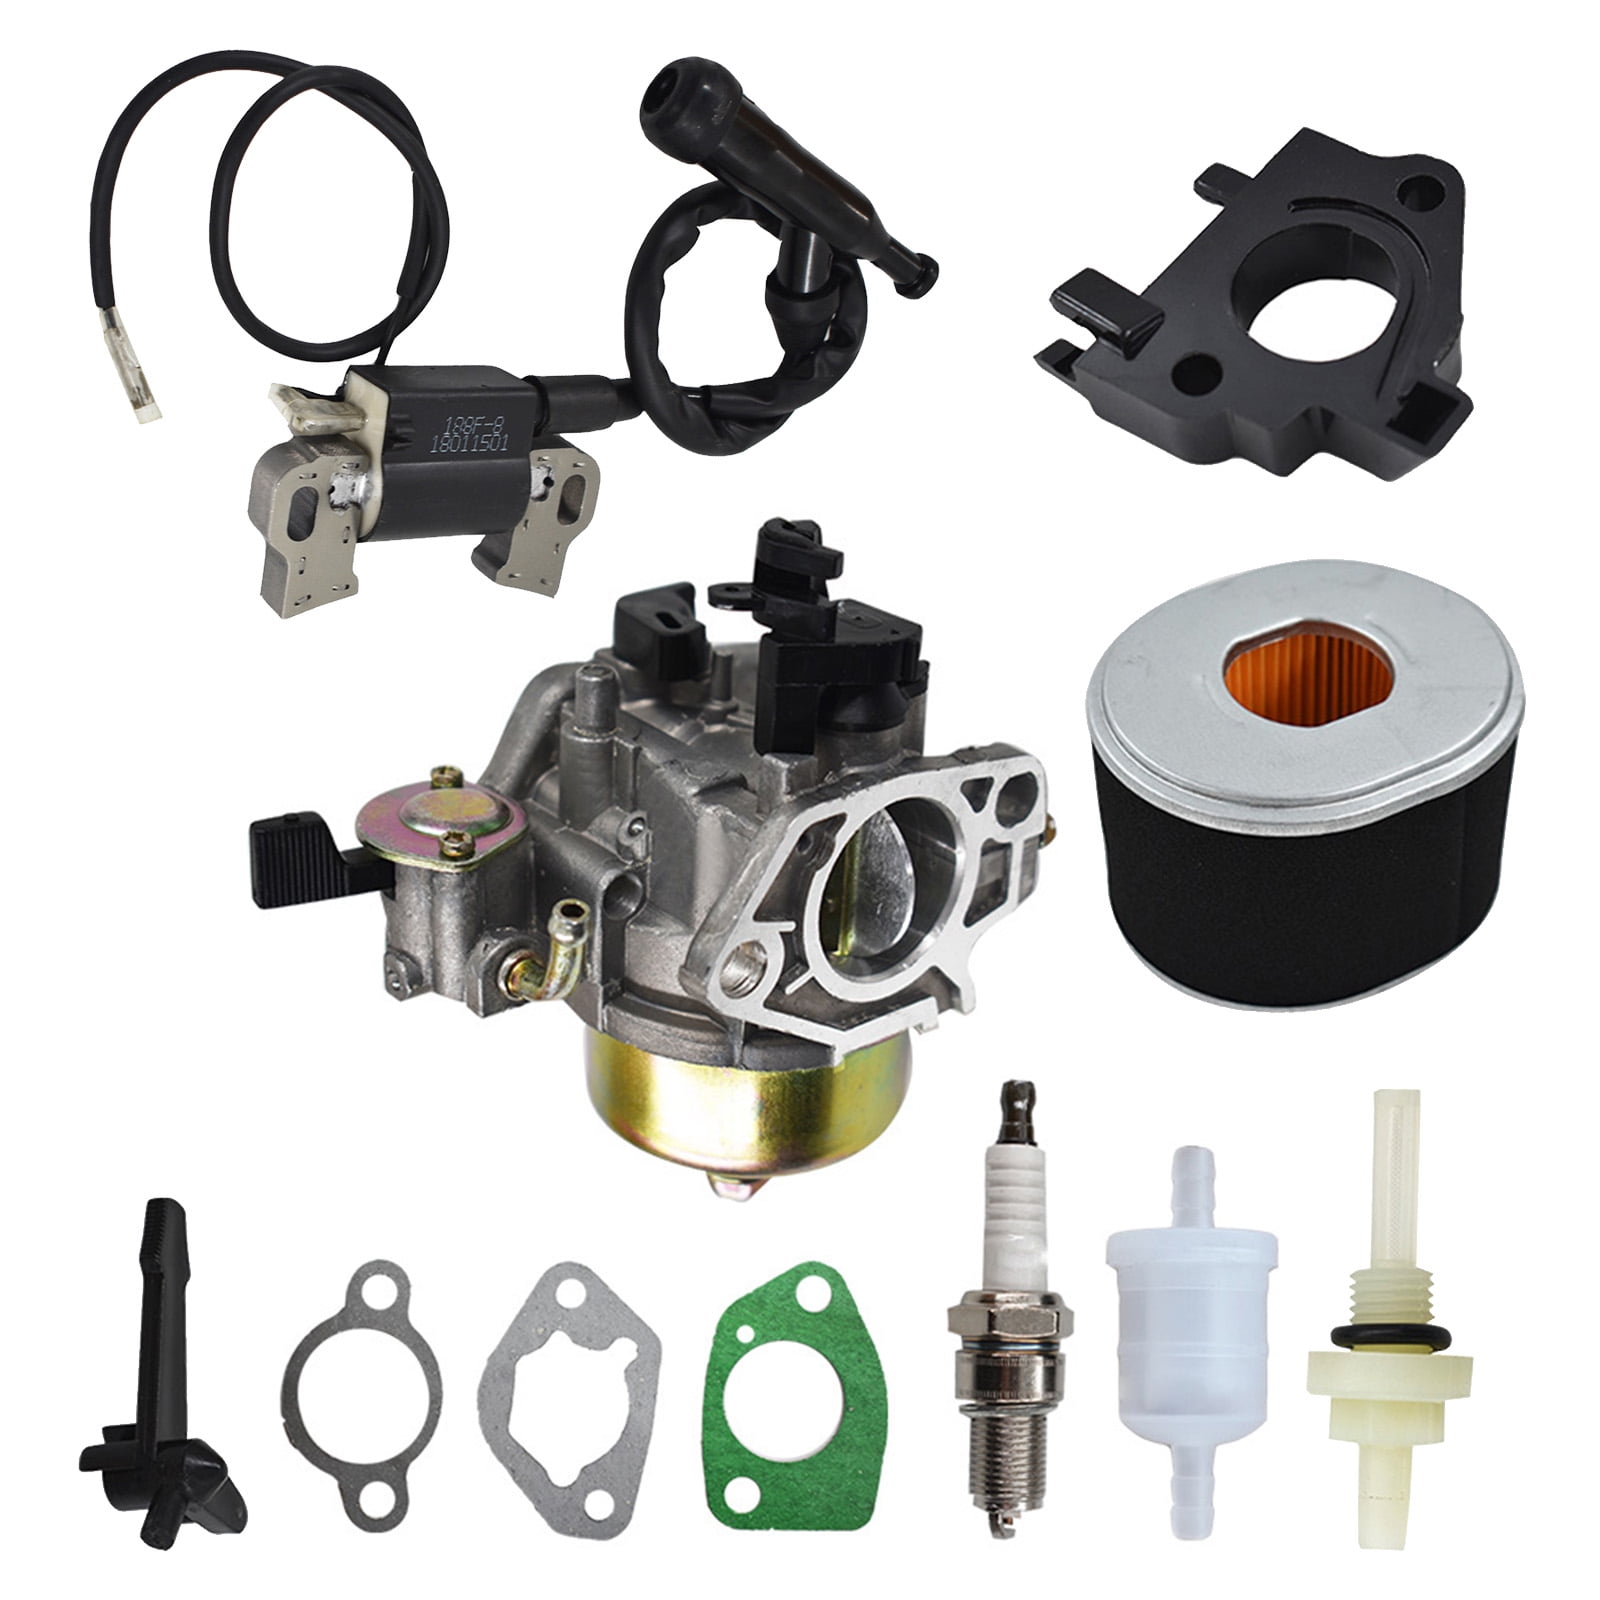 Butom GX390 Carburetor for Honda GX 390 GX340 13HP 11HP Engine Replace  16100-ZF6-V01 with Fuel Filter Gasket